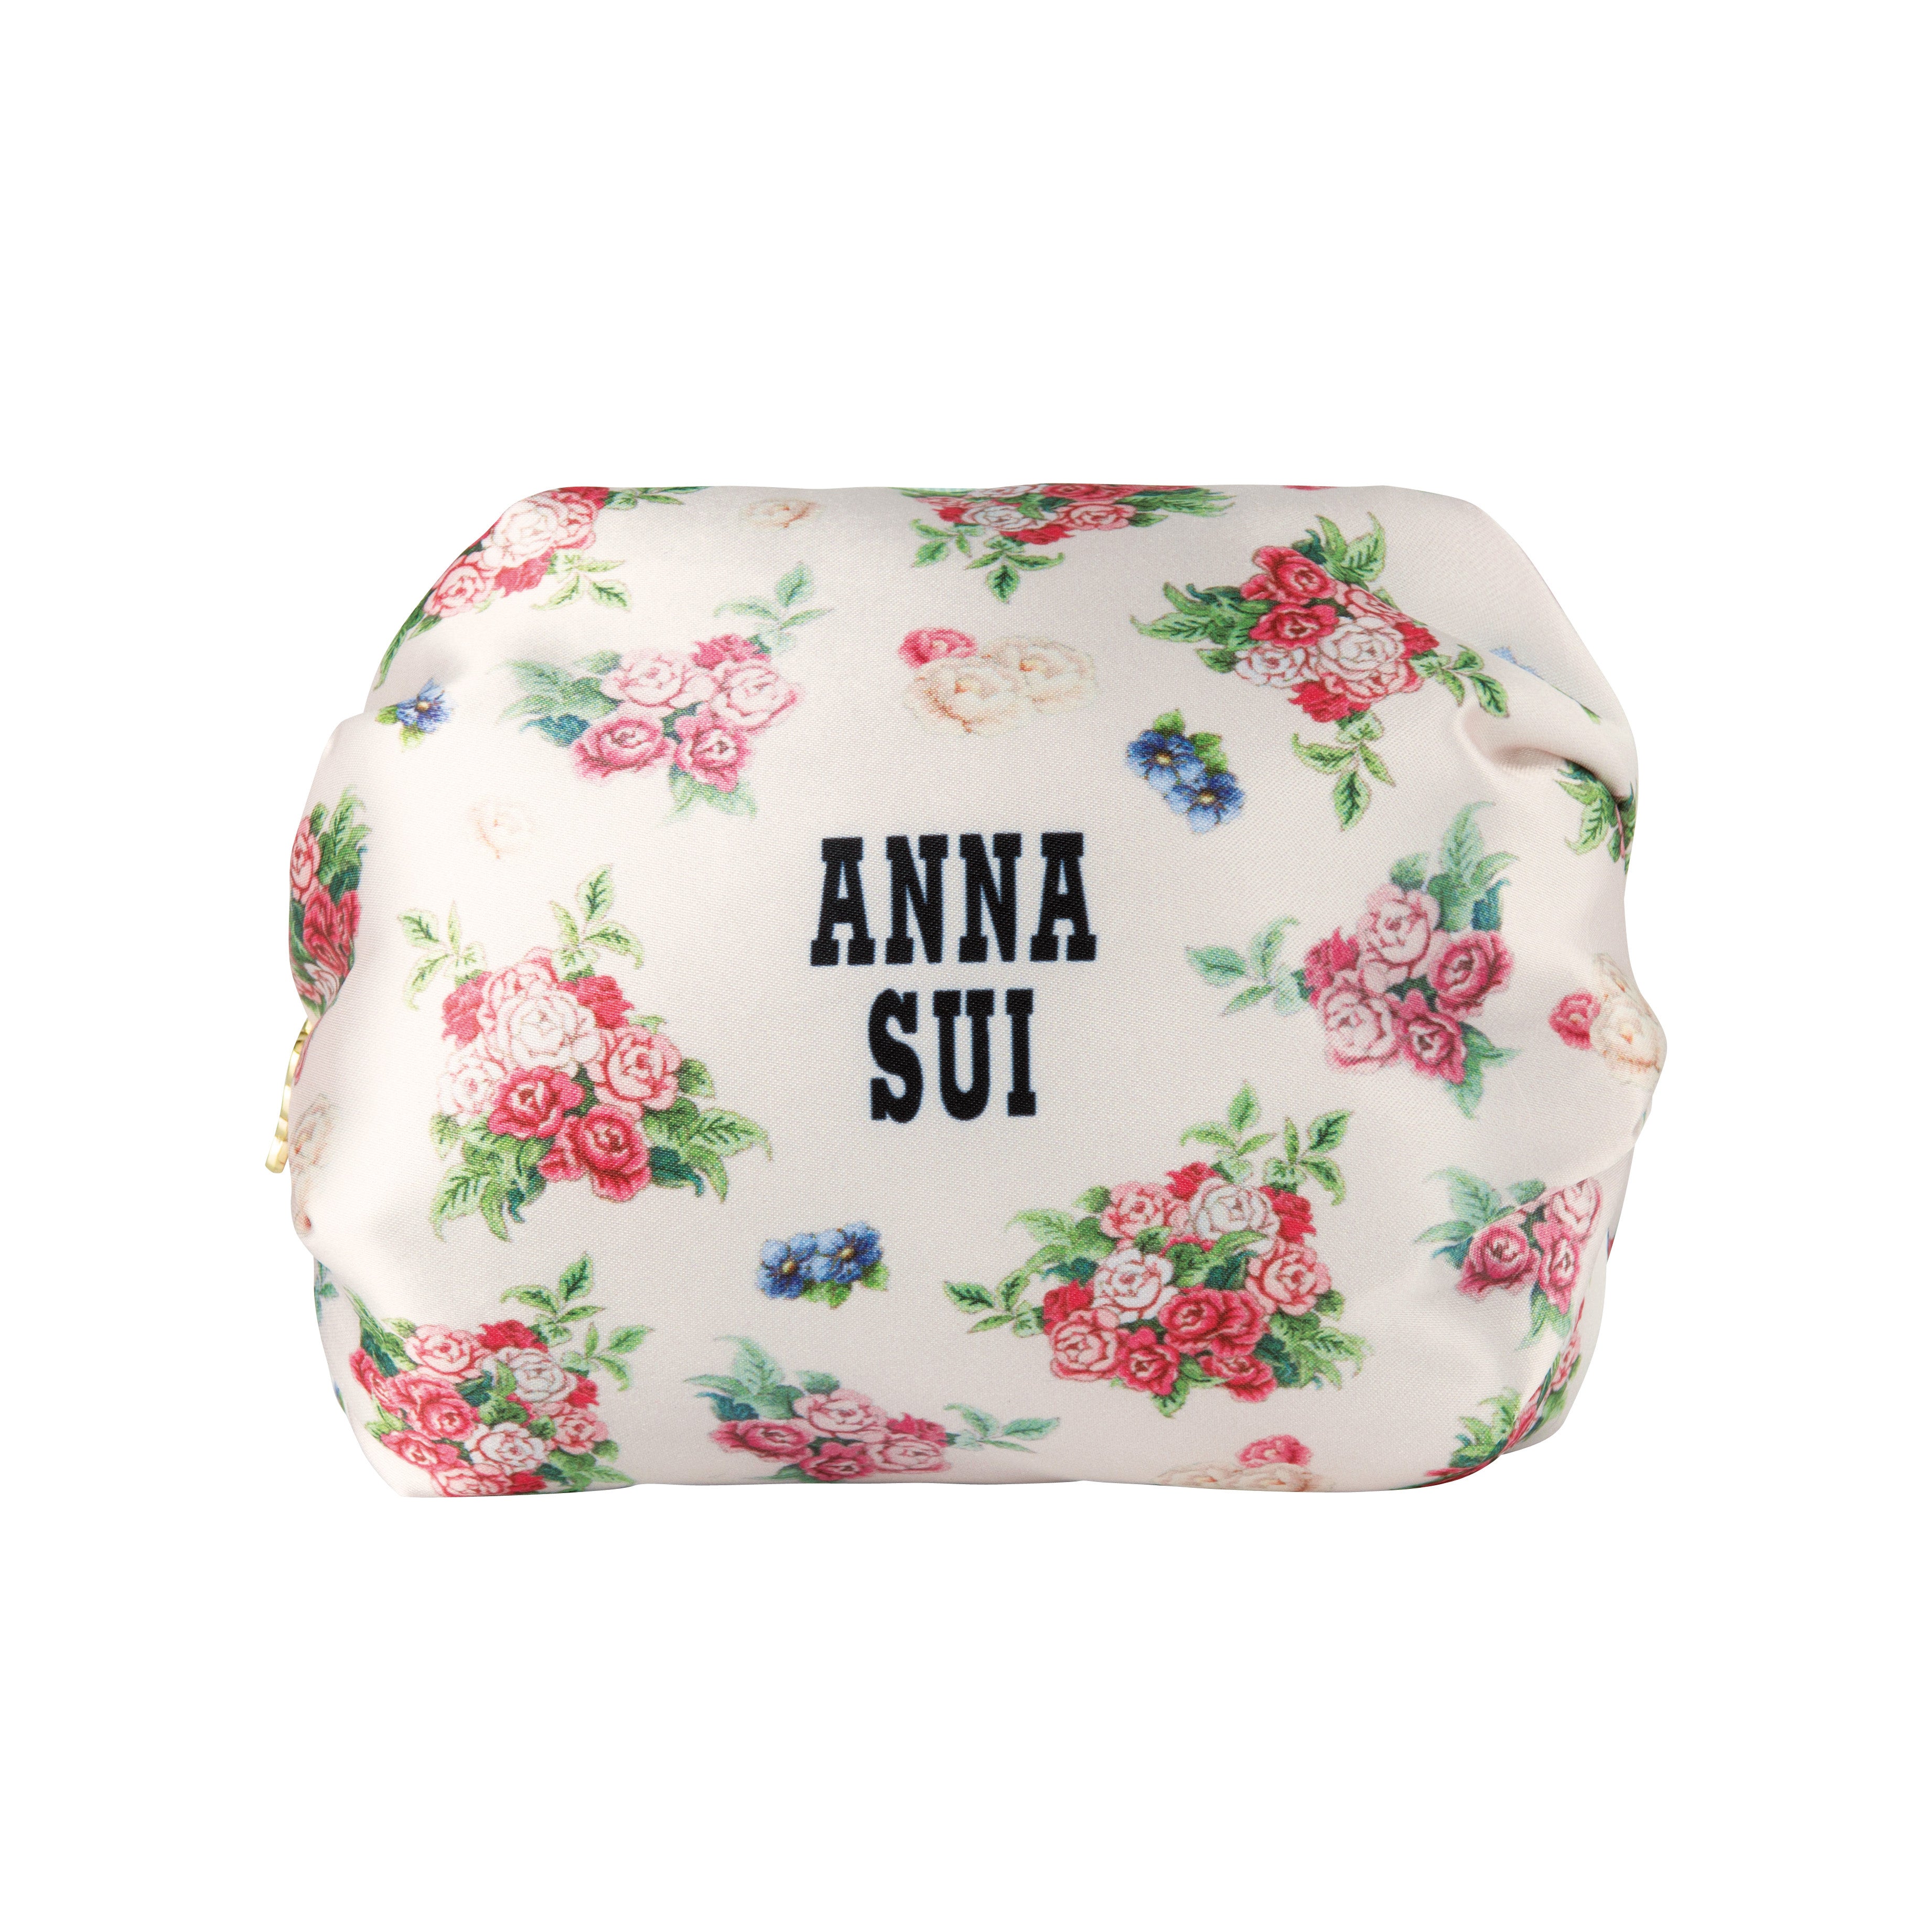 FREE Cosmetic Bag with this set, this isa round bag, beige with rosy floral design and Anna Sui label on it, zipper on top